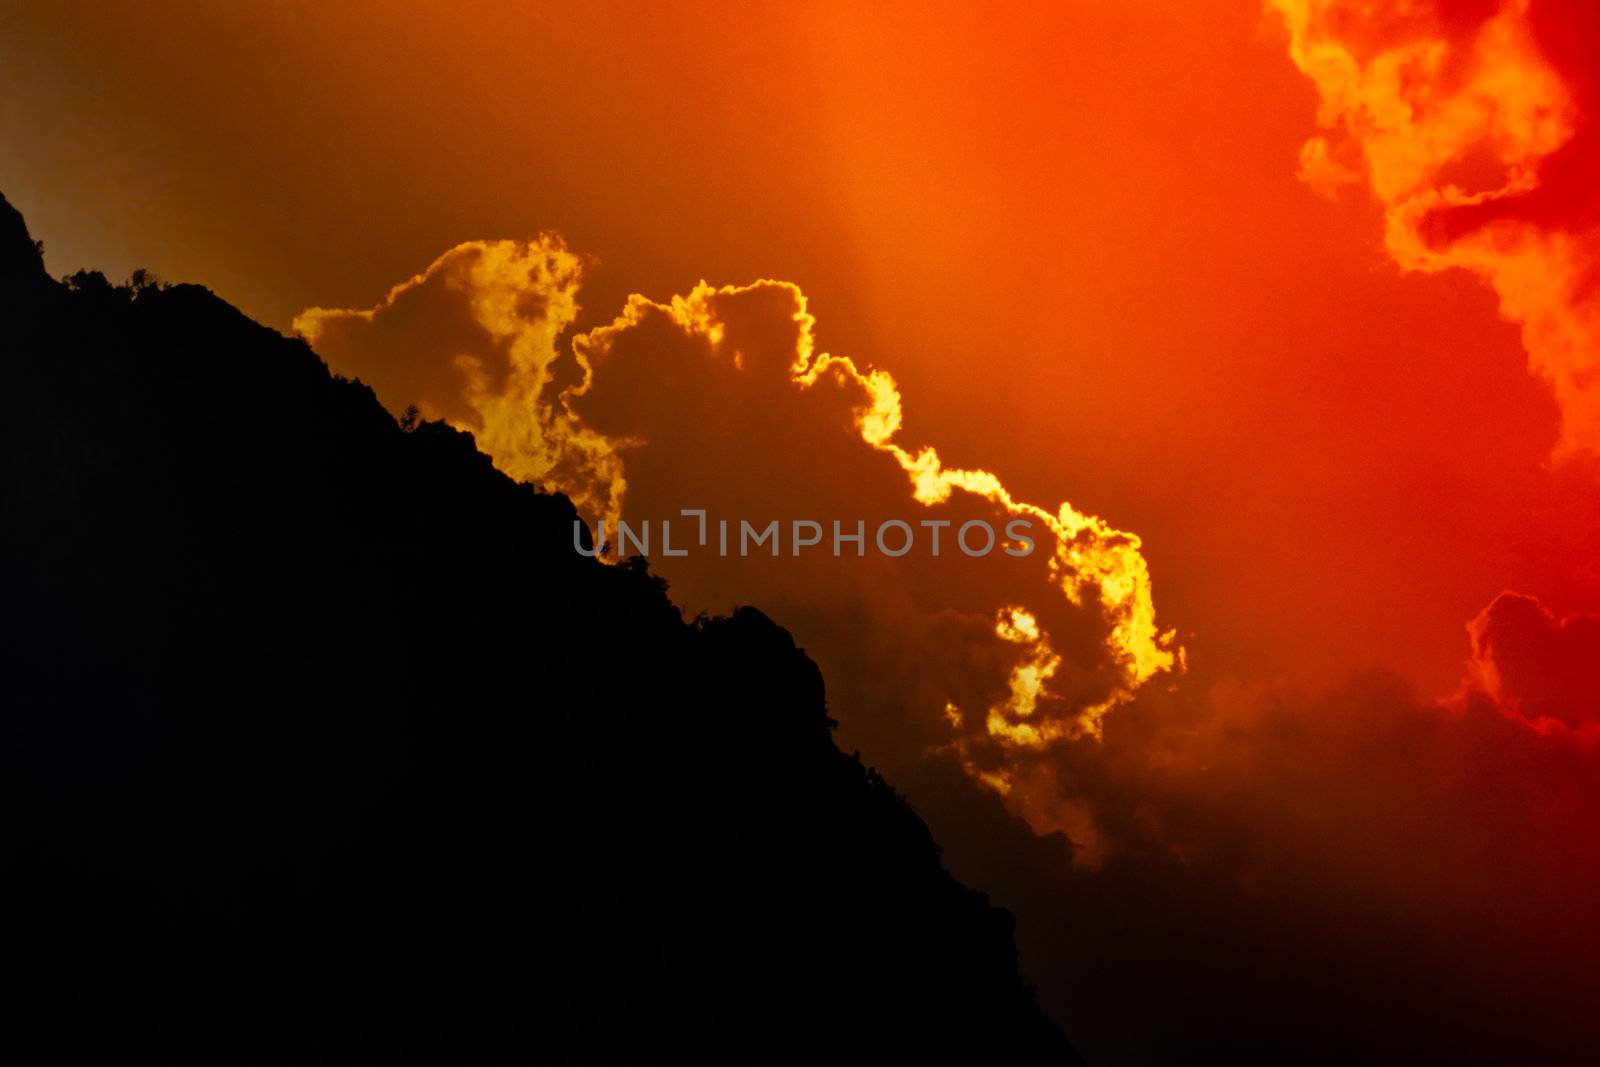 Sun sets behind mountain silhouette by PiLens